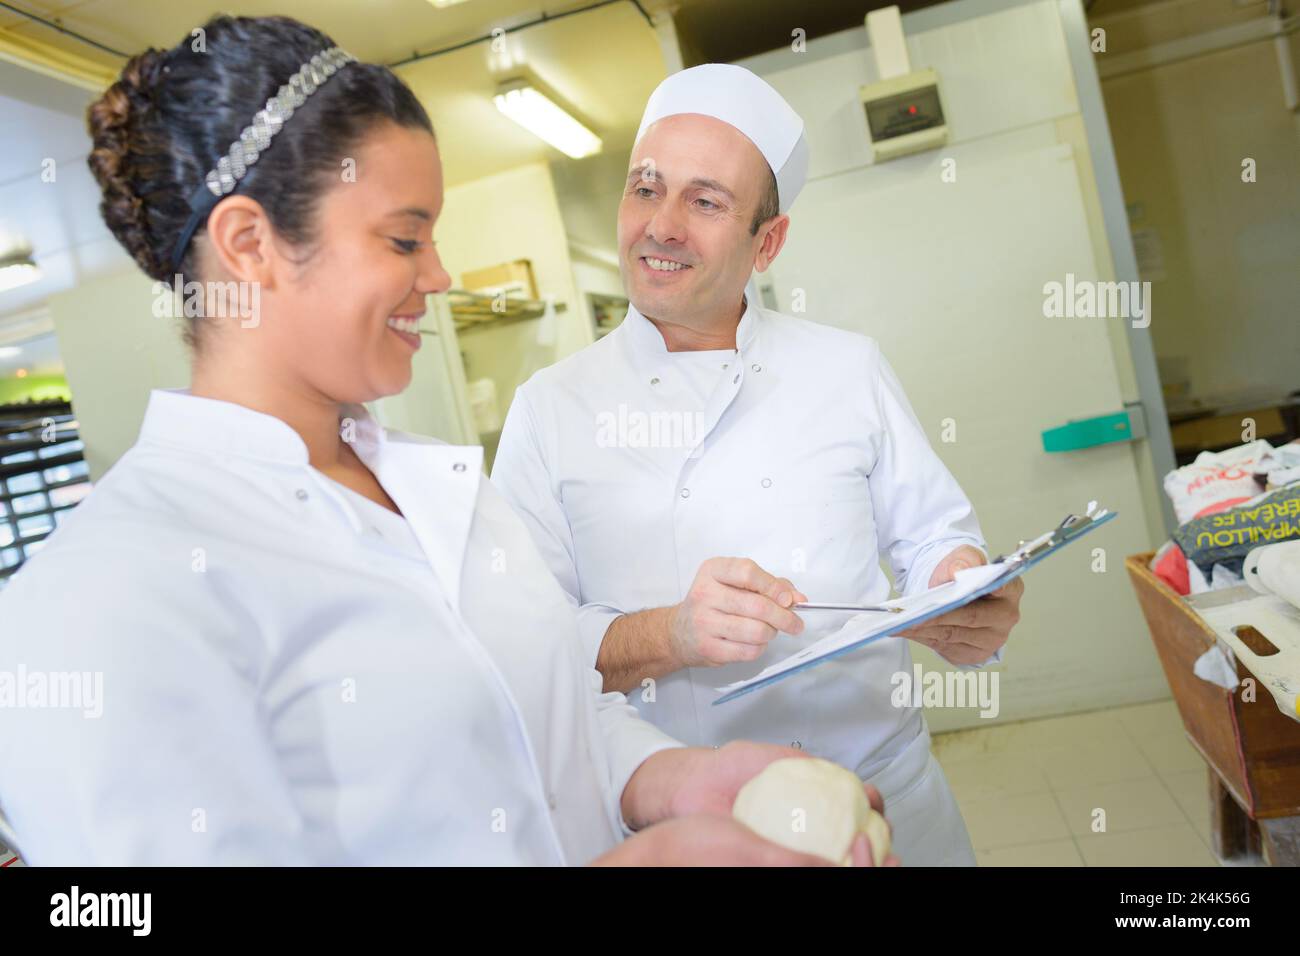 pastry cook professional team man and woman in restaurant kitchen Stock Photo